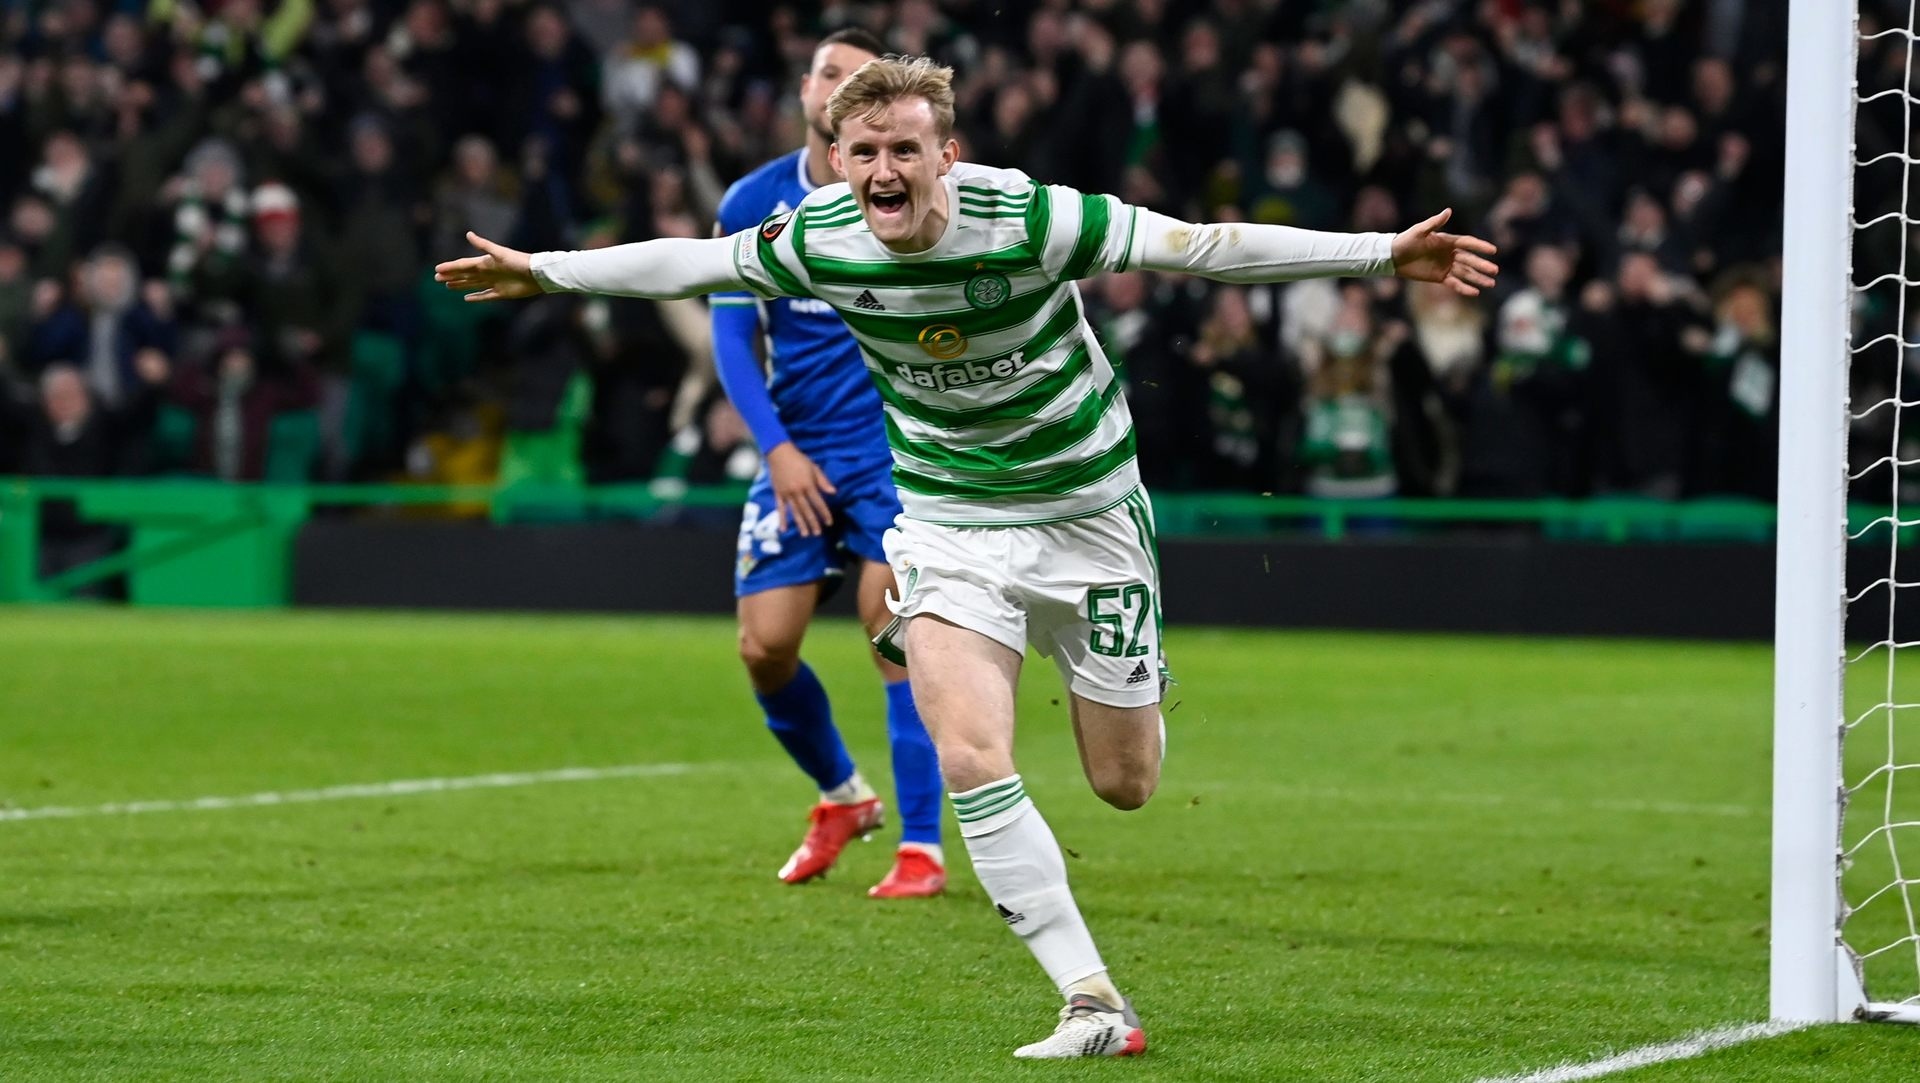 Celtic will continue their European journey in the Europa Conference League.